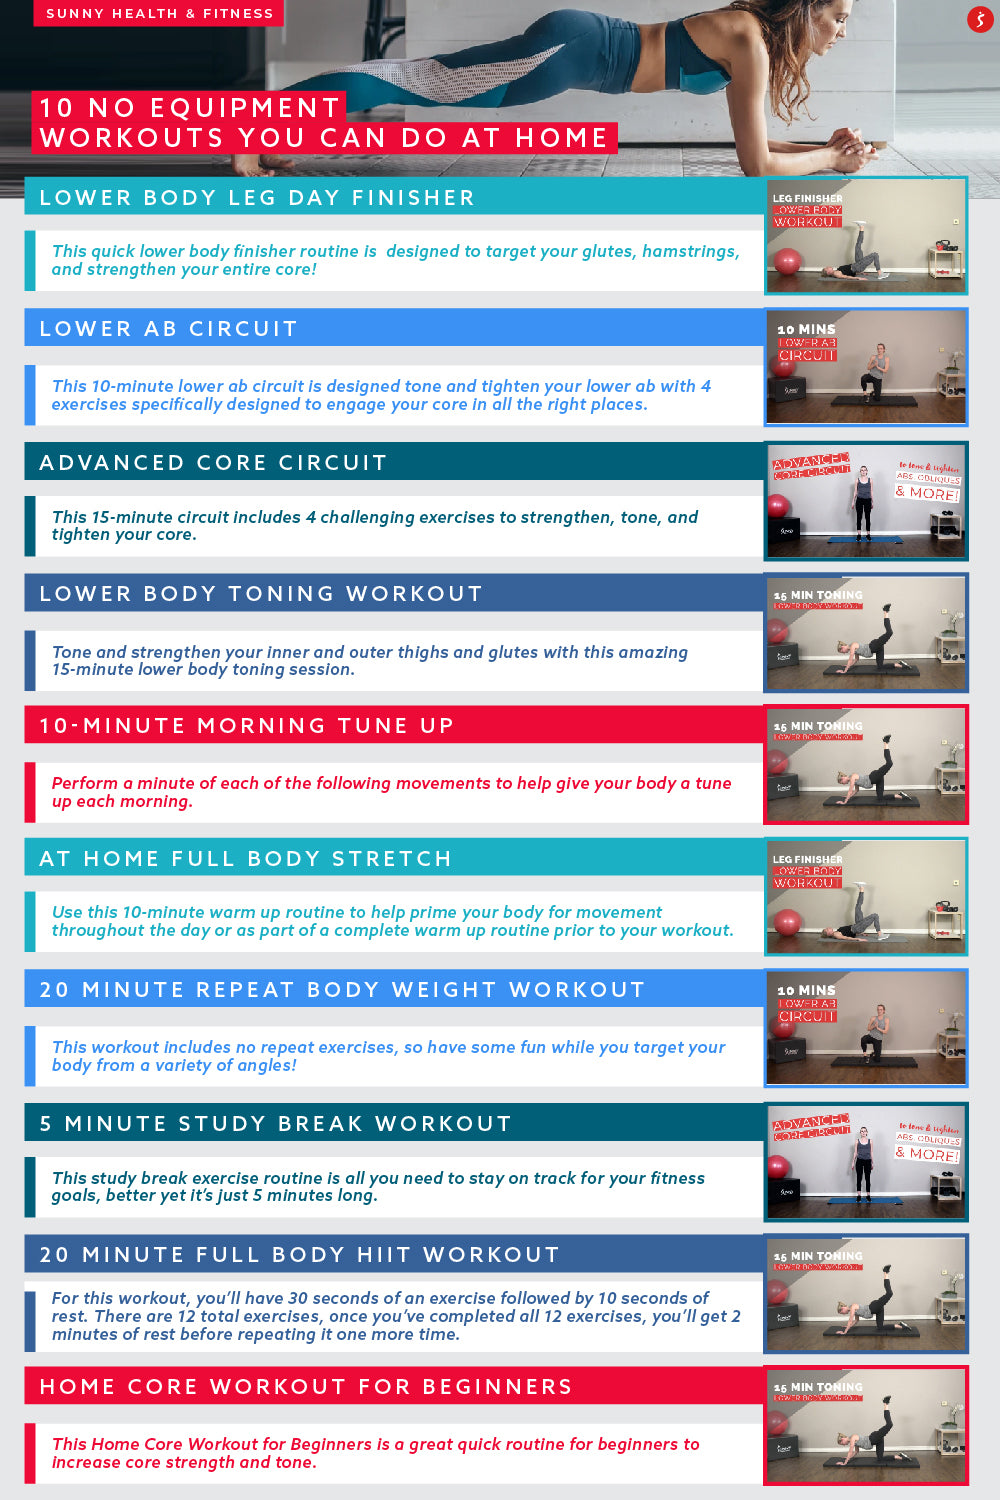 At-Home Workout for Beginners: 20-Minute Exercise Routine